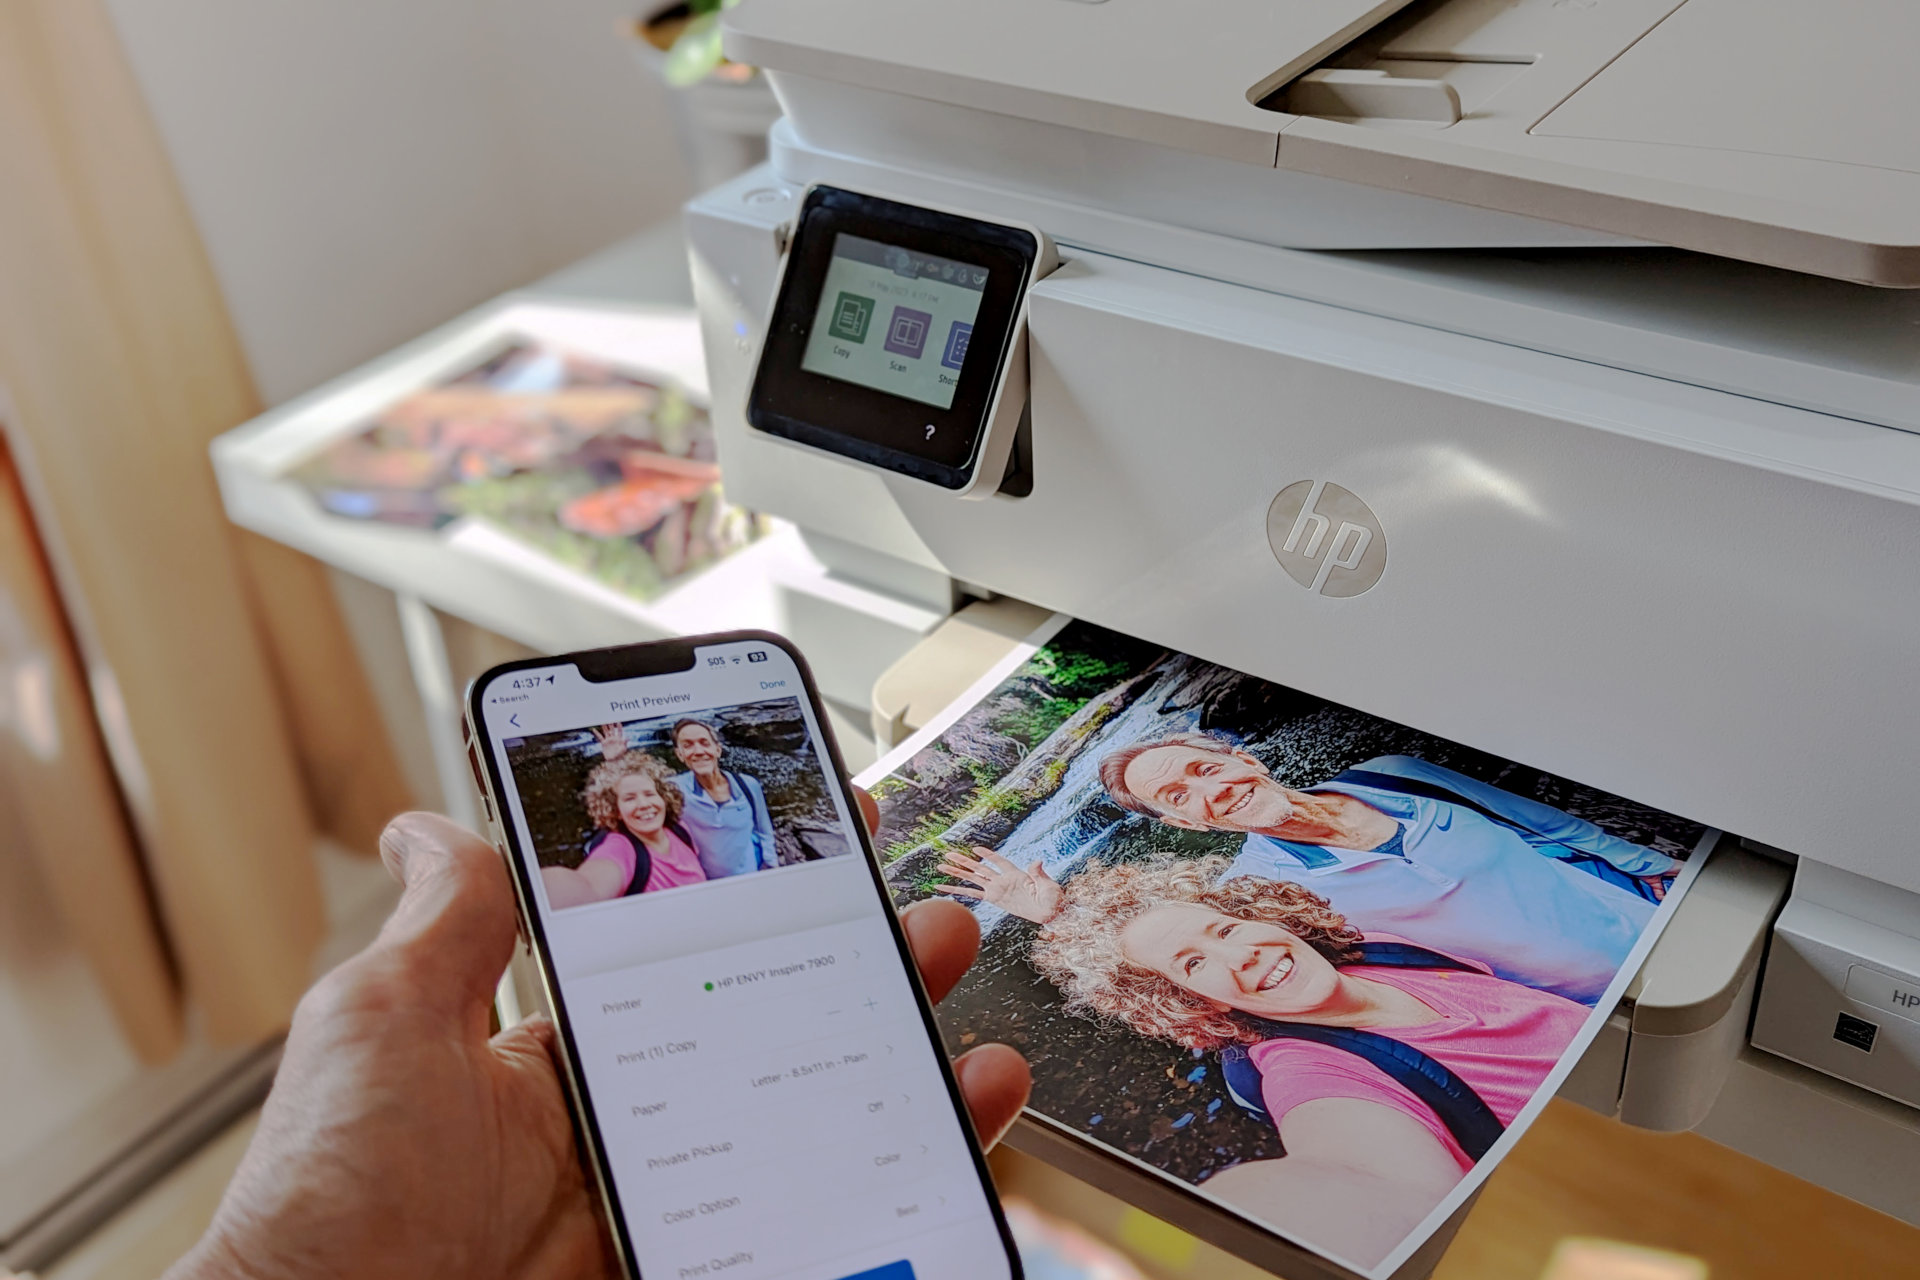 HP Envy Inspire 7955e in action, printing a full-page photo from an iPhone.